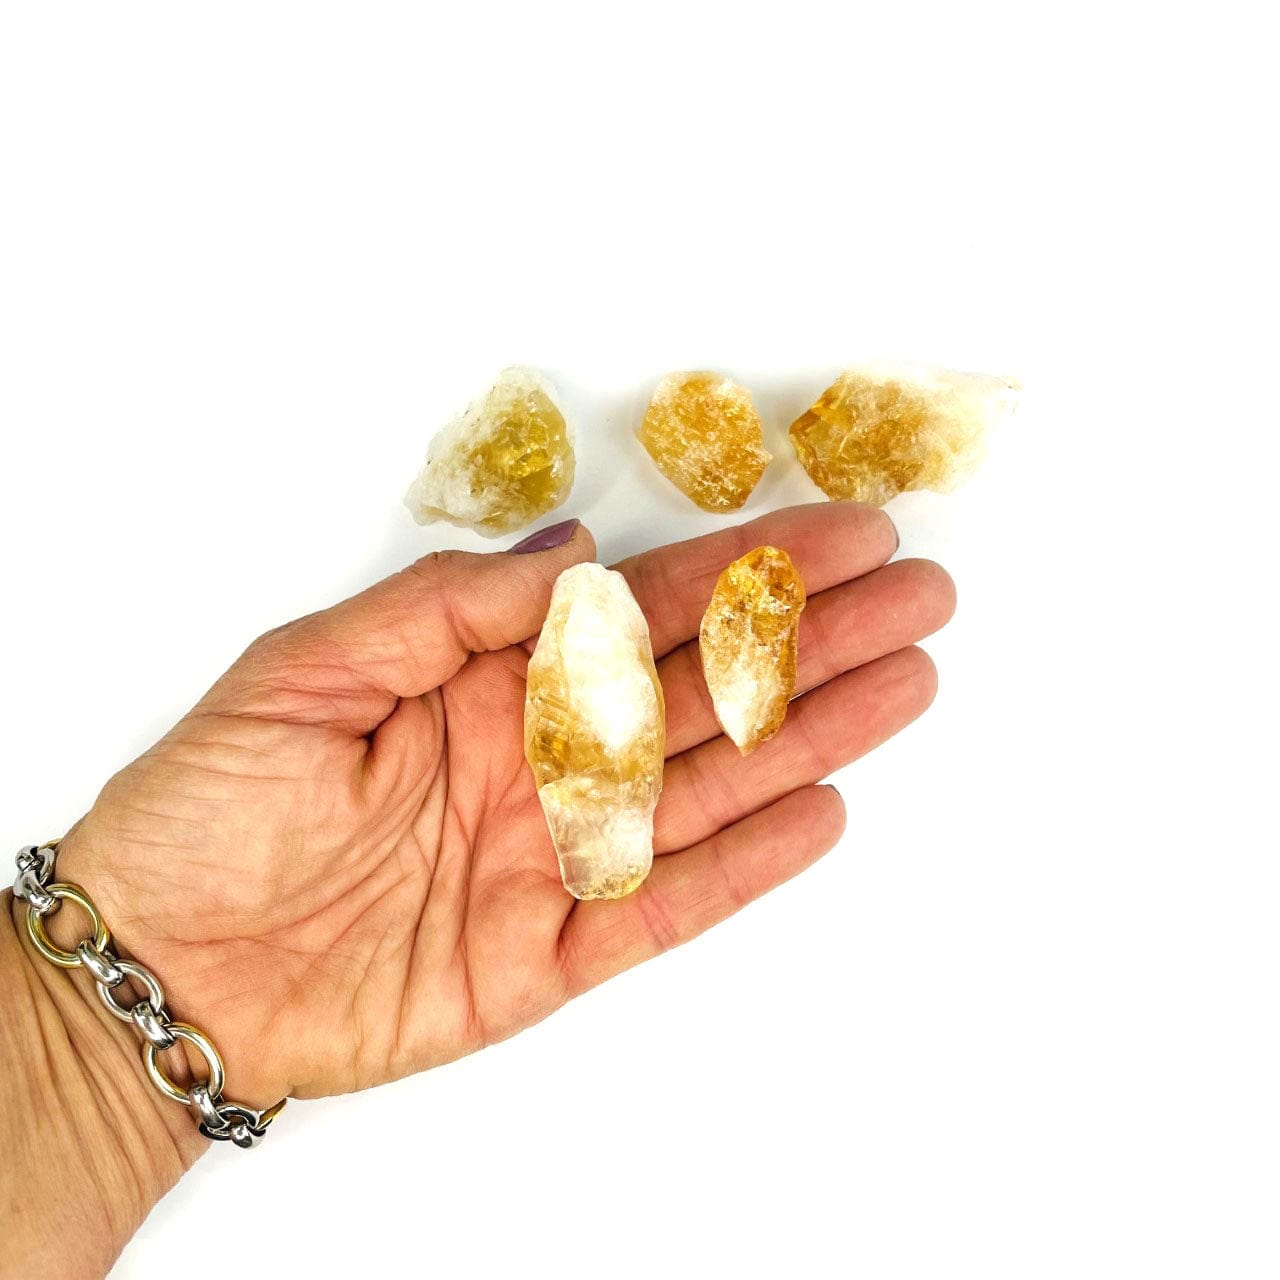 Rough Citrine in a hand showing assorted sizes for size reference